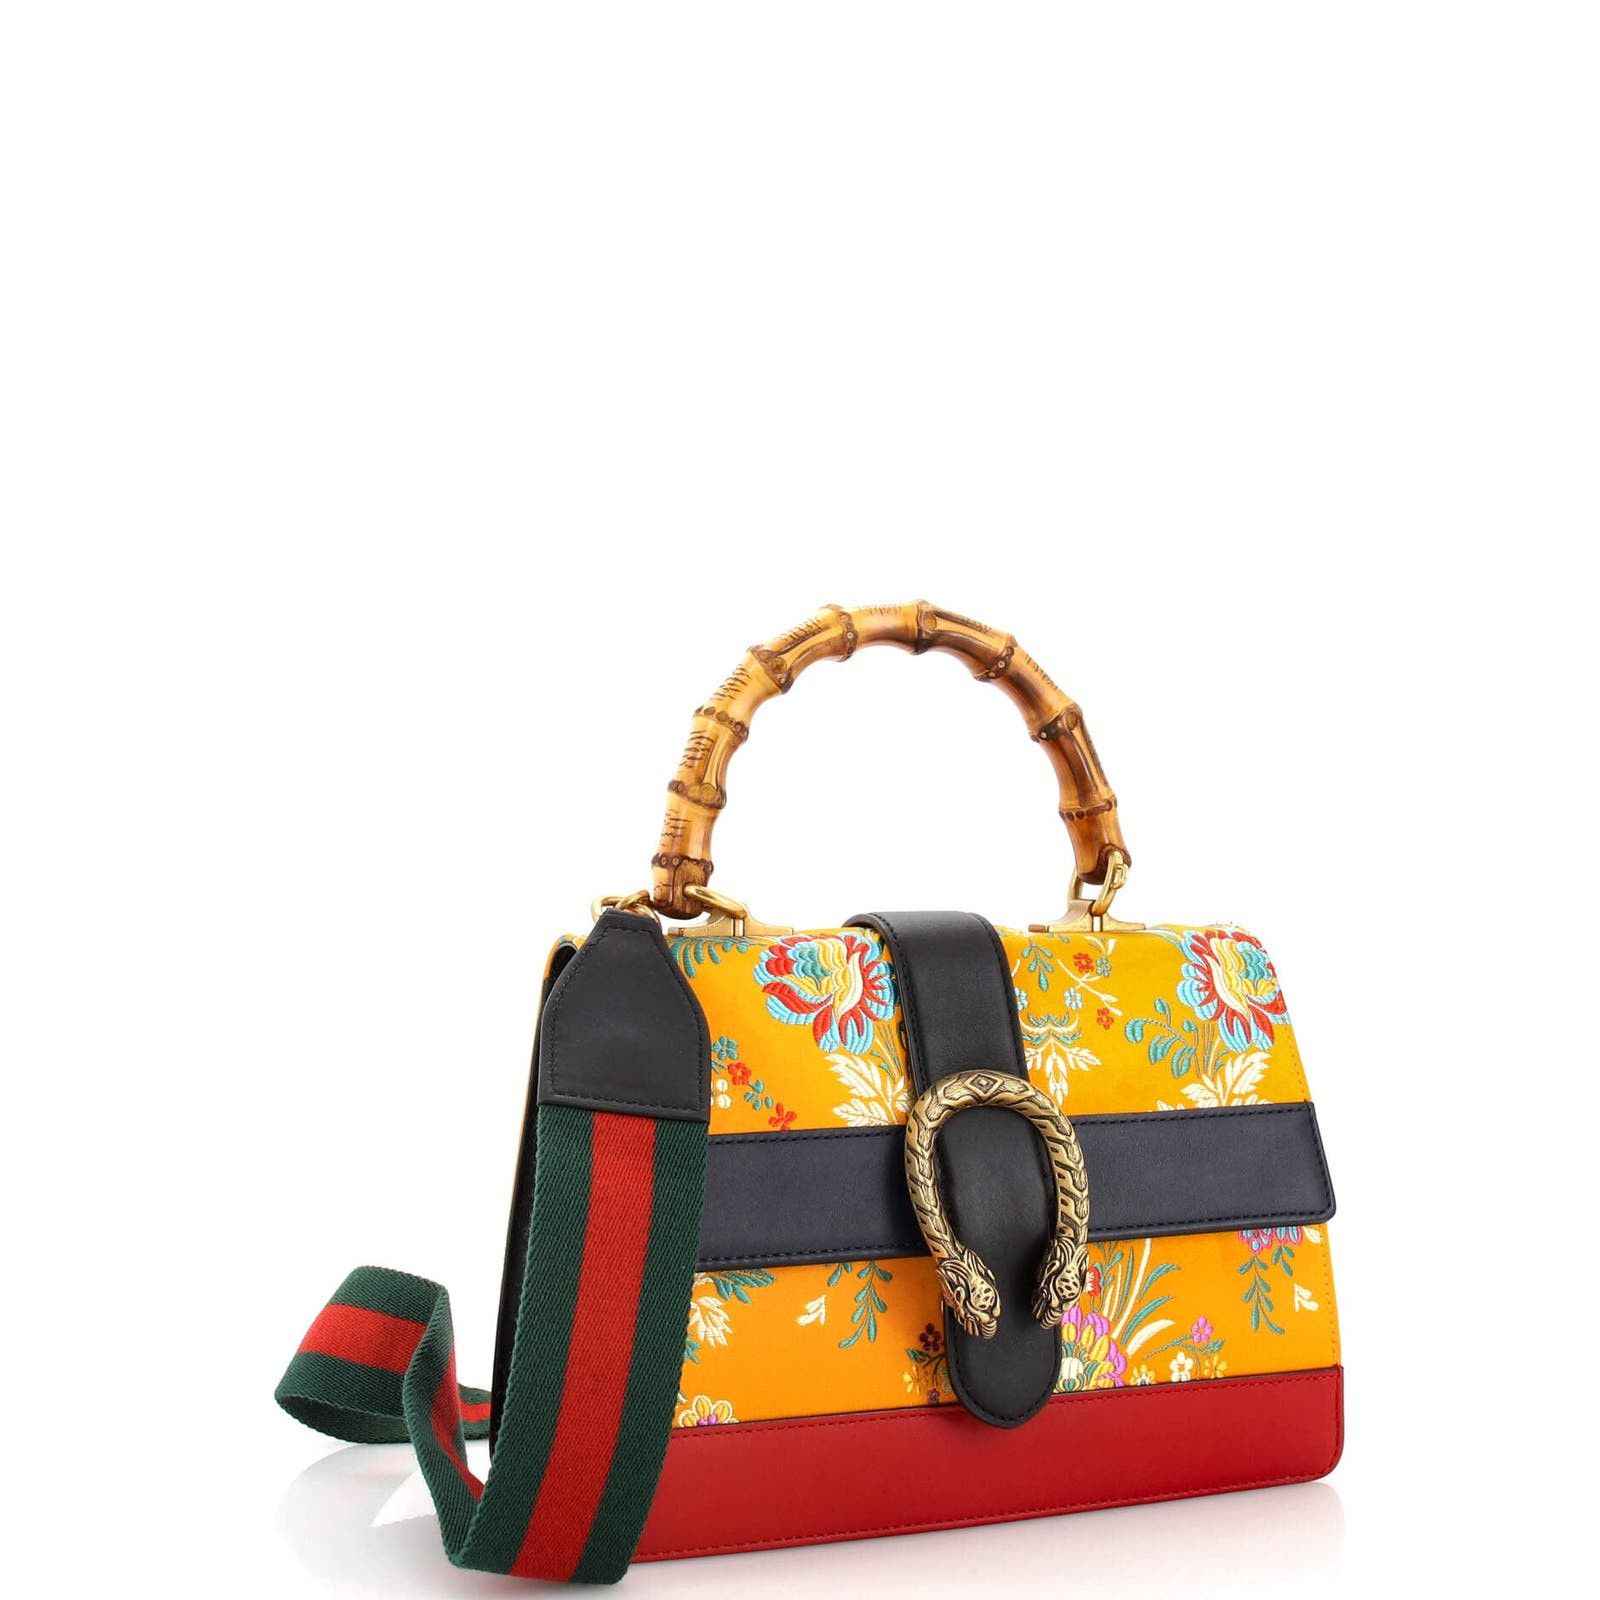 Gucci Dionysus Bamboo Top Handle Bag Floral Jacquard with Leather Size ONE SIZE - 2 Preview